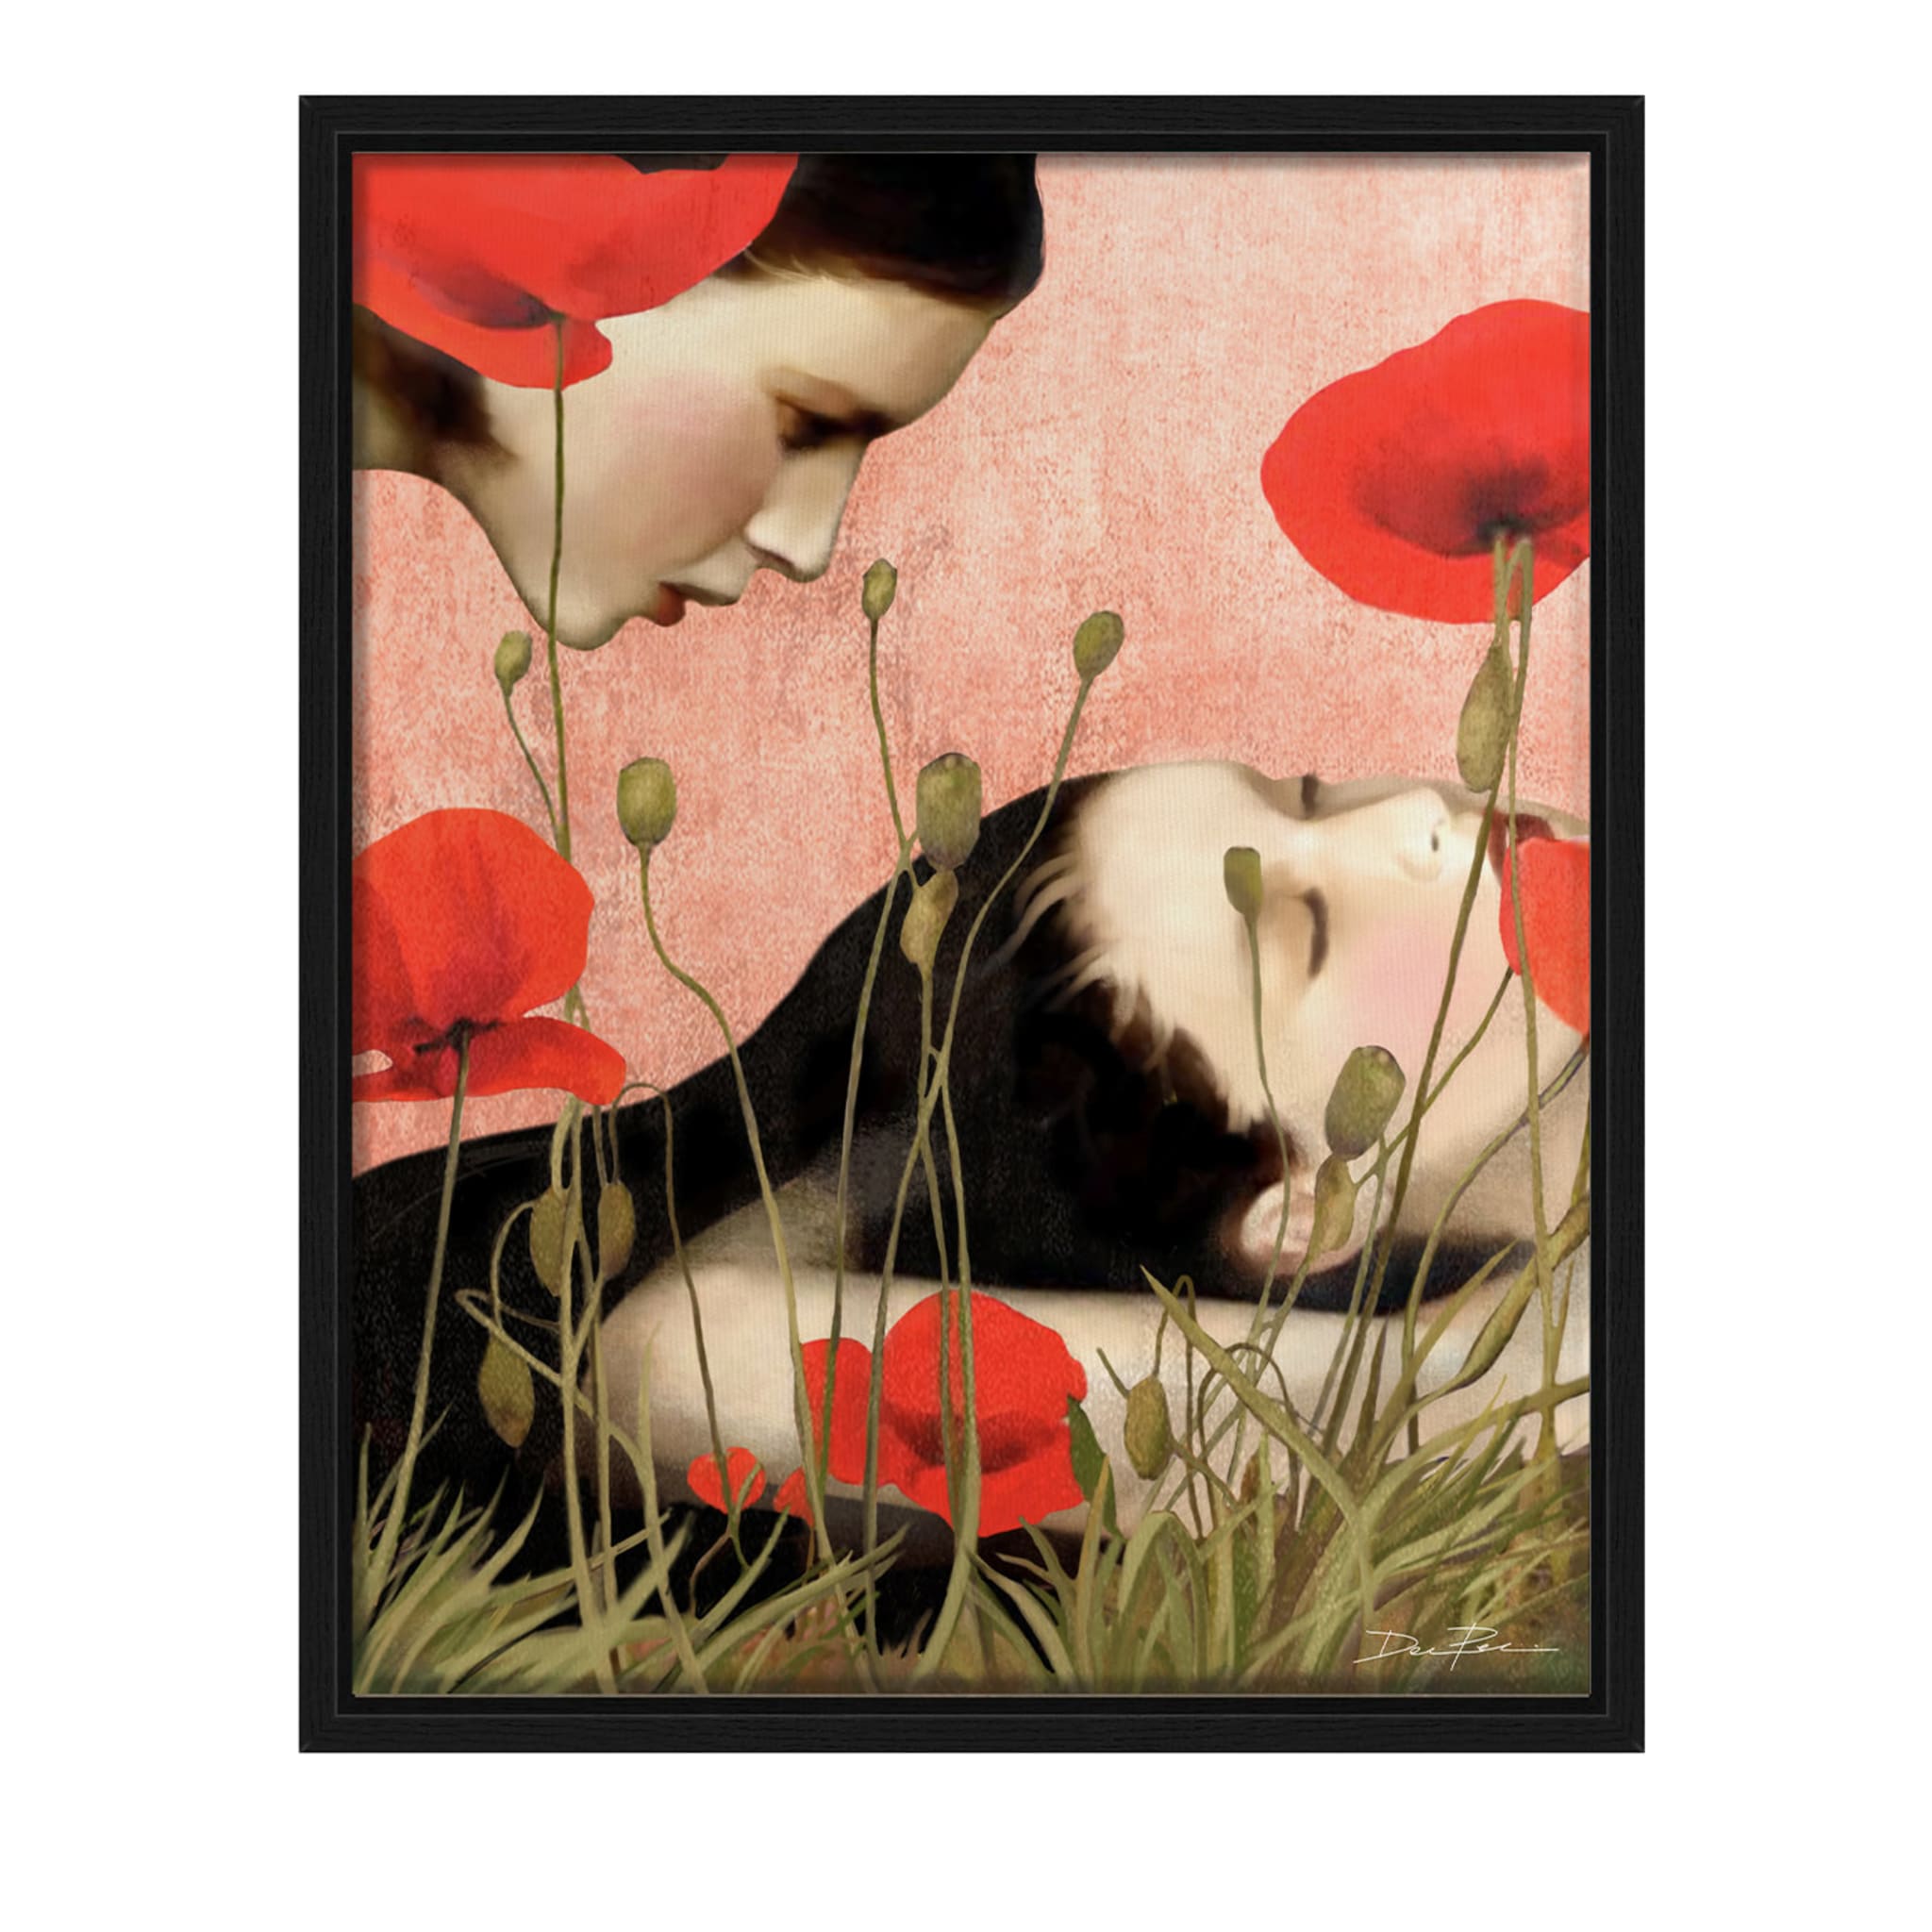 Dreaming in a Field of Poppies Digital Painting - Main view